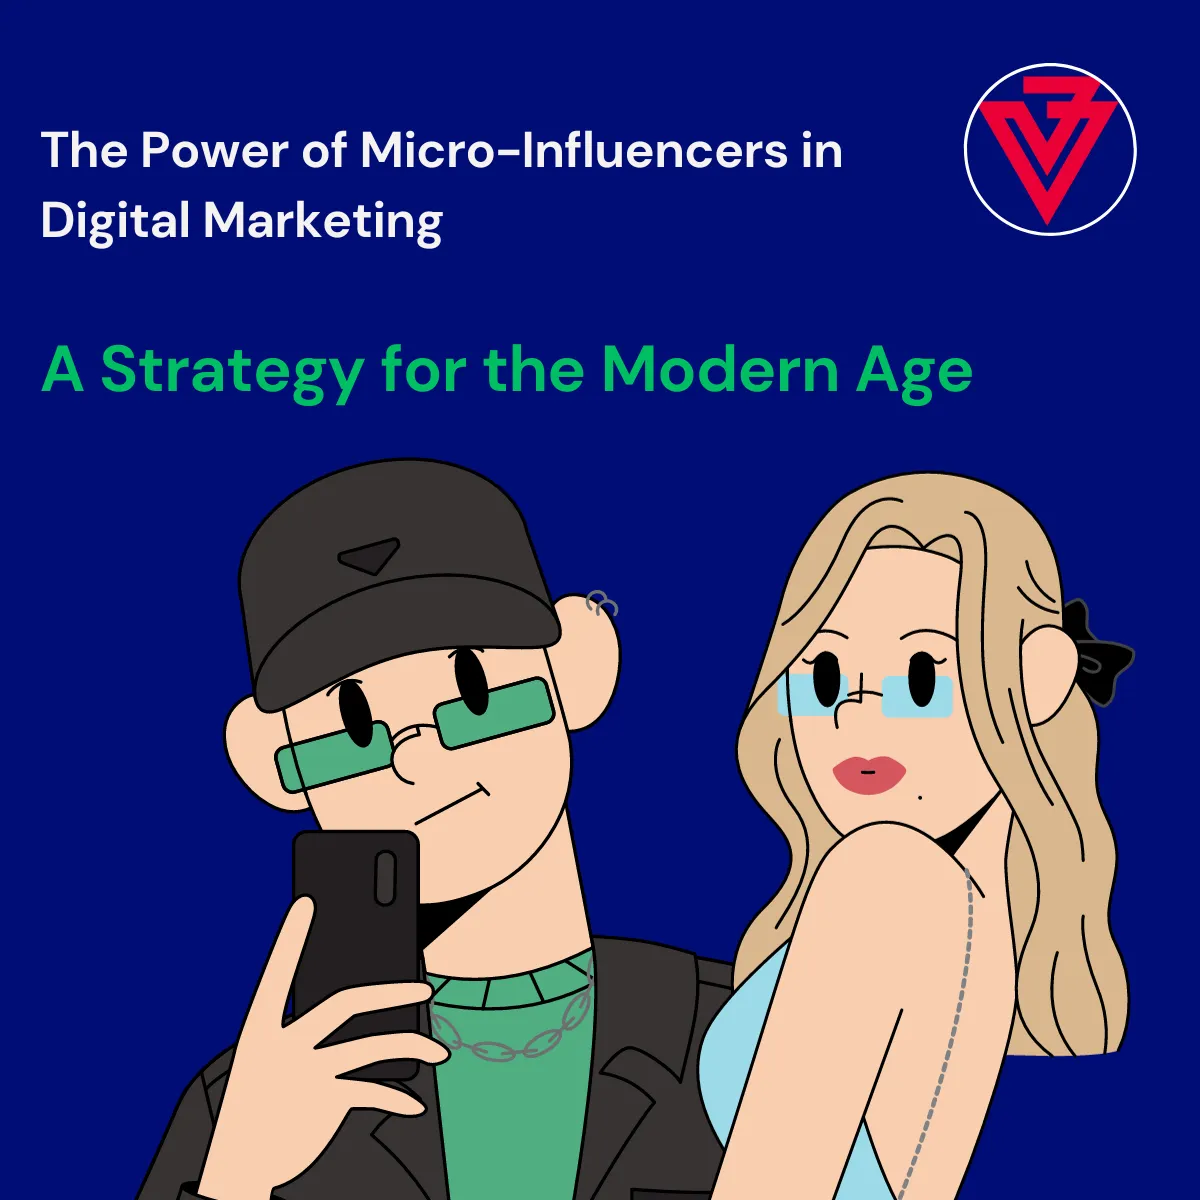 The Power of Micro-Influencers in Digital Marketing: A Strategy for the Modern Age